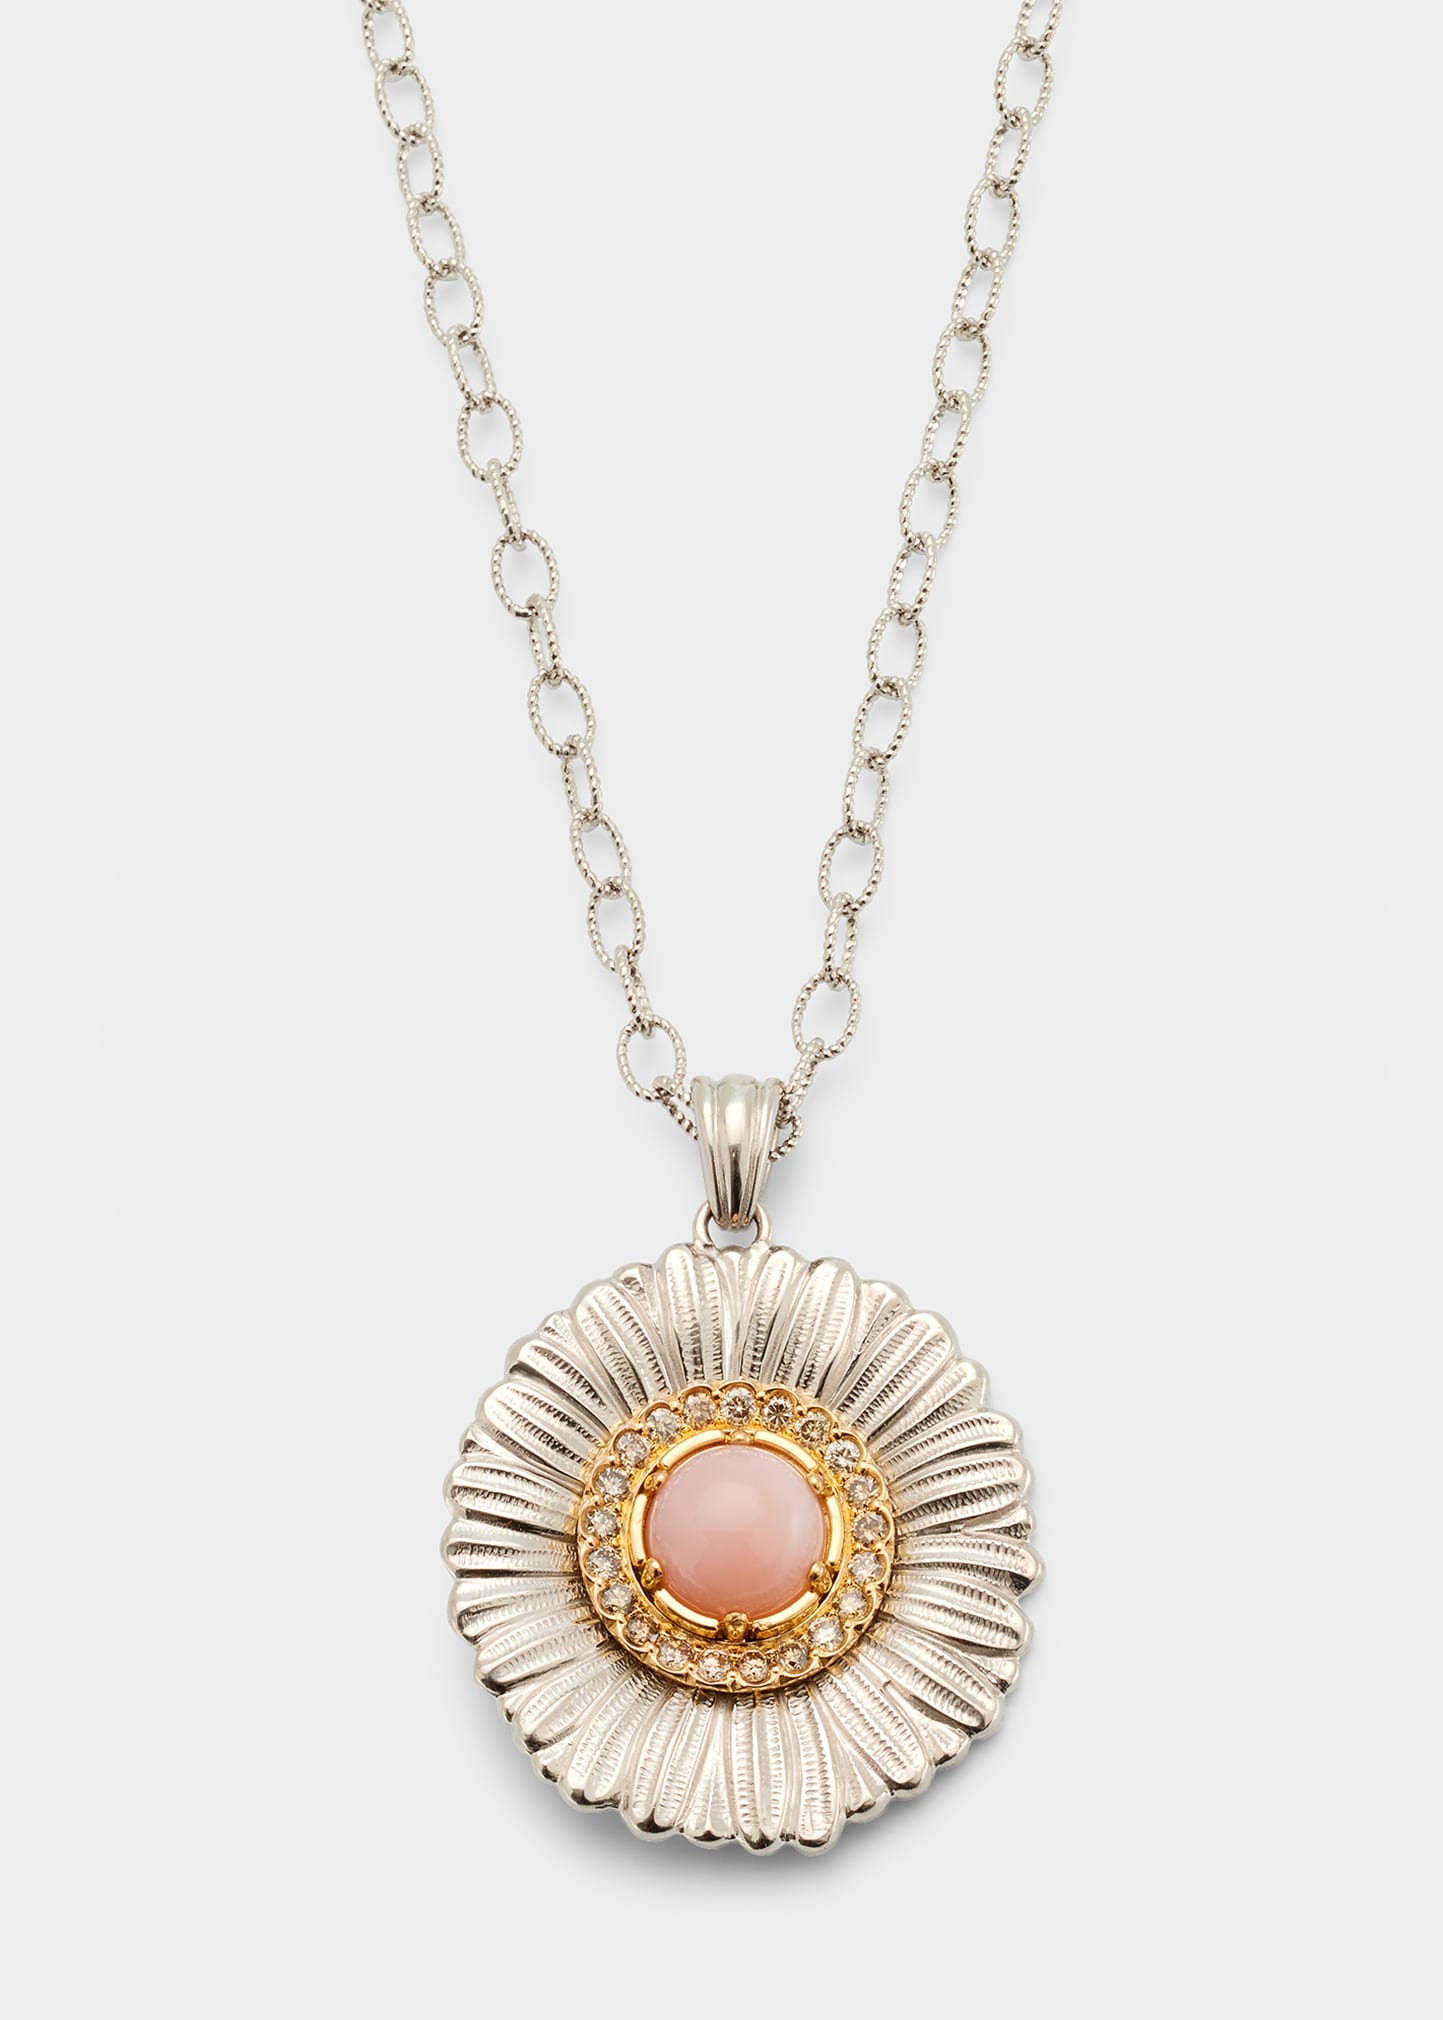 Daisy Pendant Necklace with Pink Opal